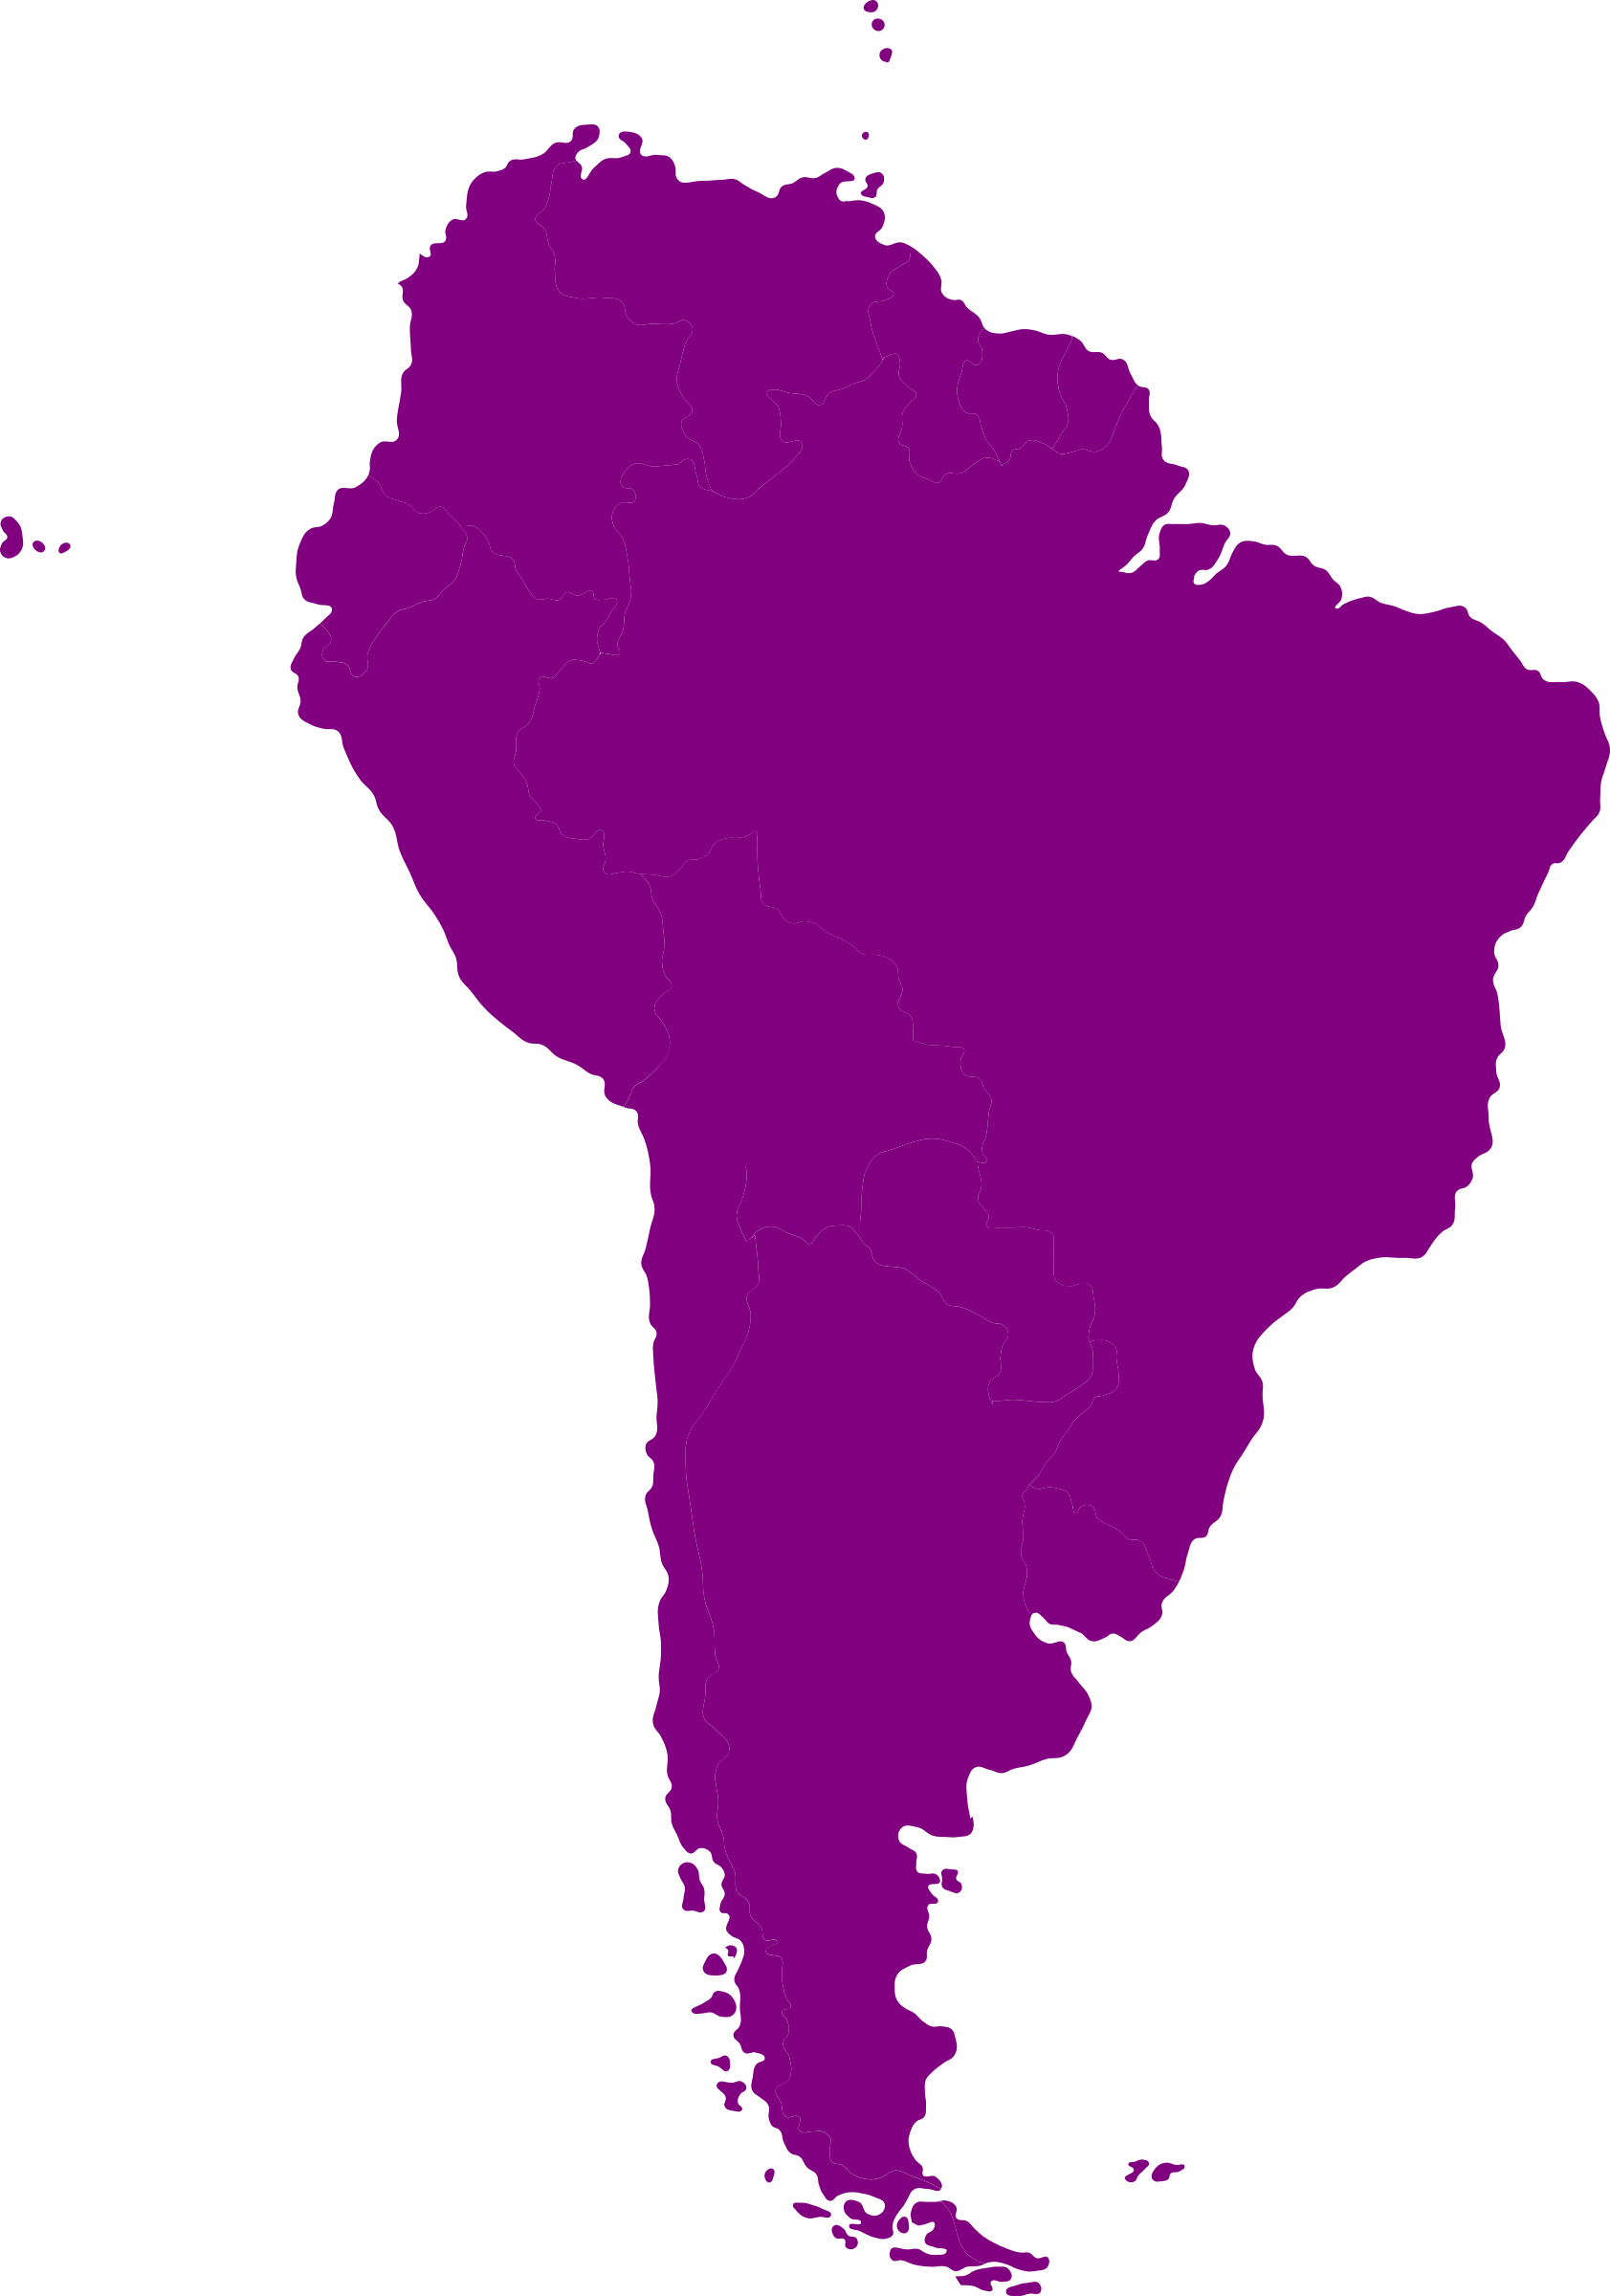 South American Continent By @iyo, Continental Map Of - South America Continent Outline (1683x2400)